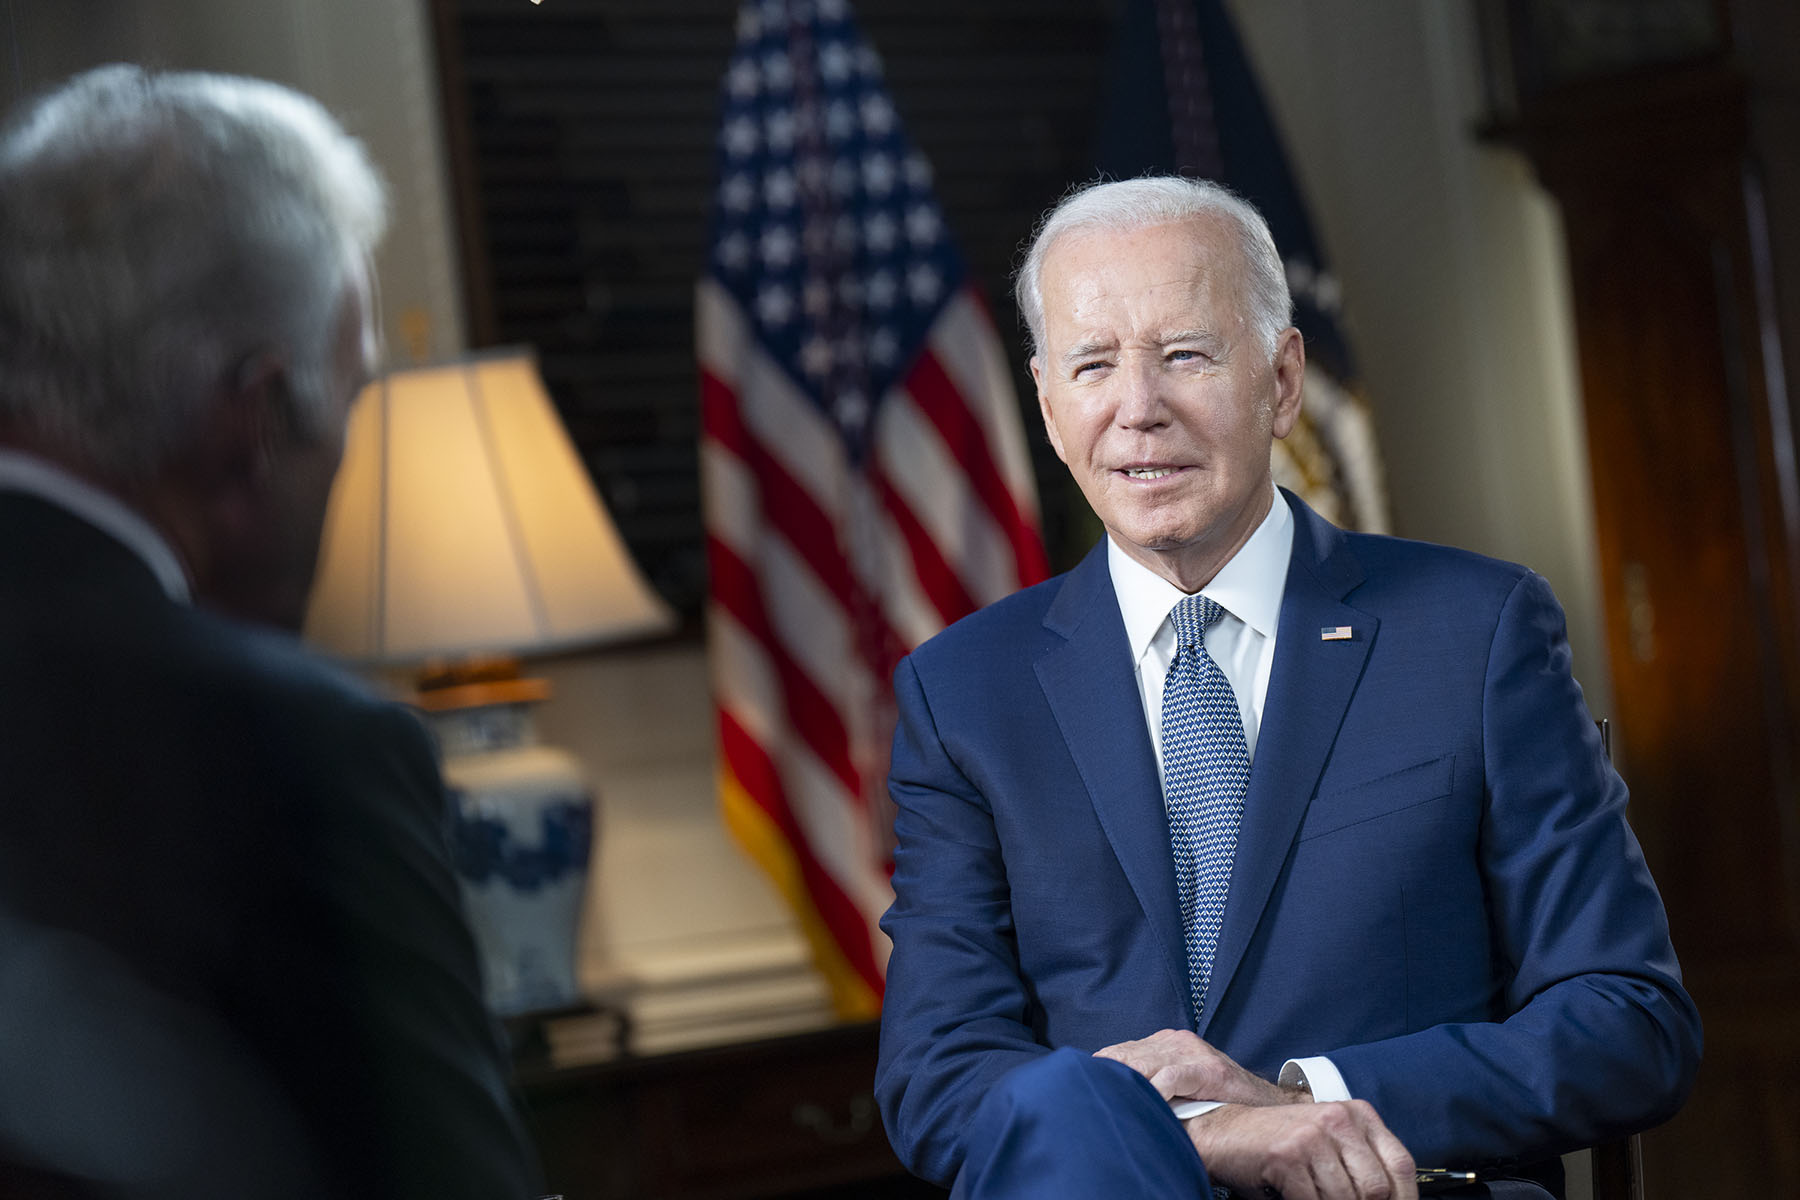 President Joe Biden participates in an interview in the Map Room of the White House.